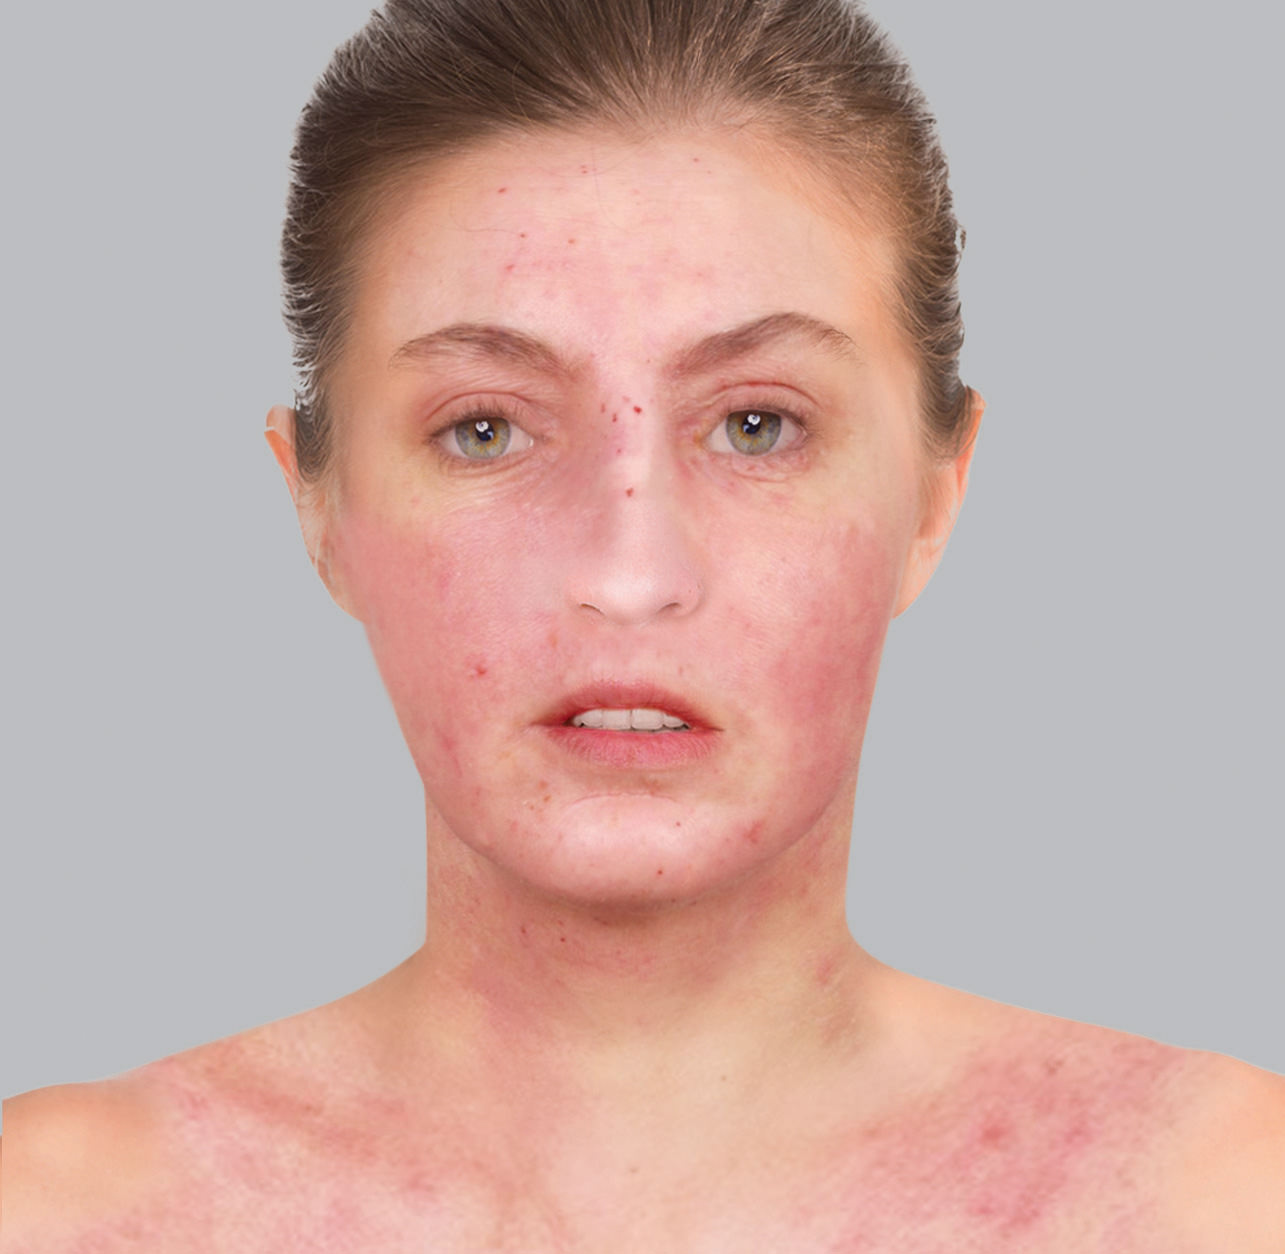 Atopic eczema symptoms: red patches or erythema